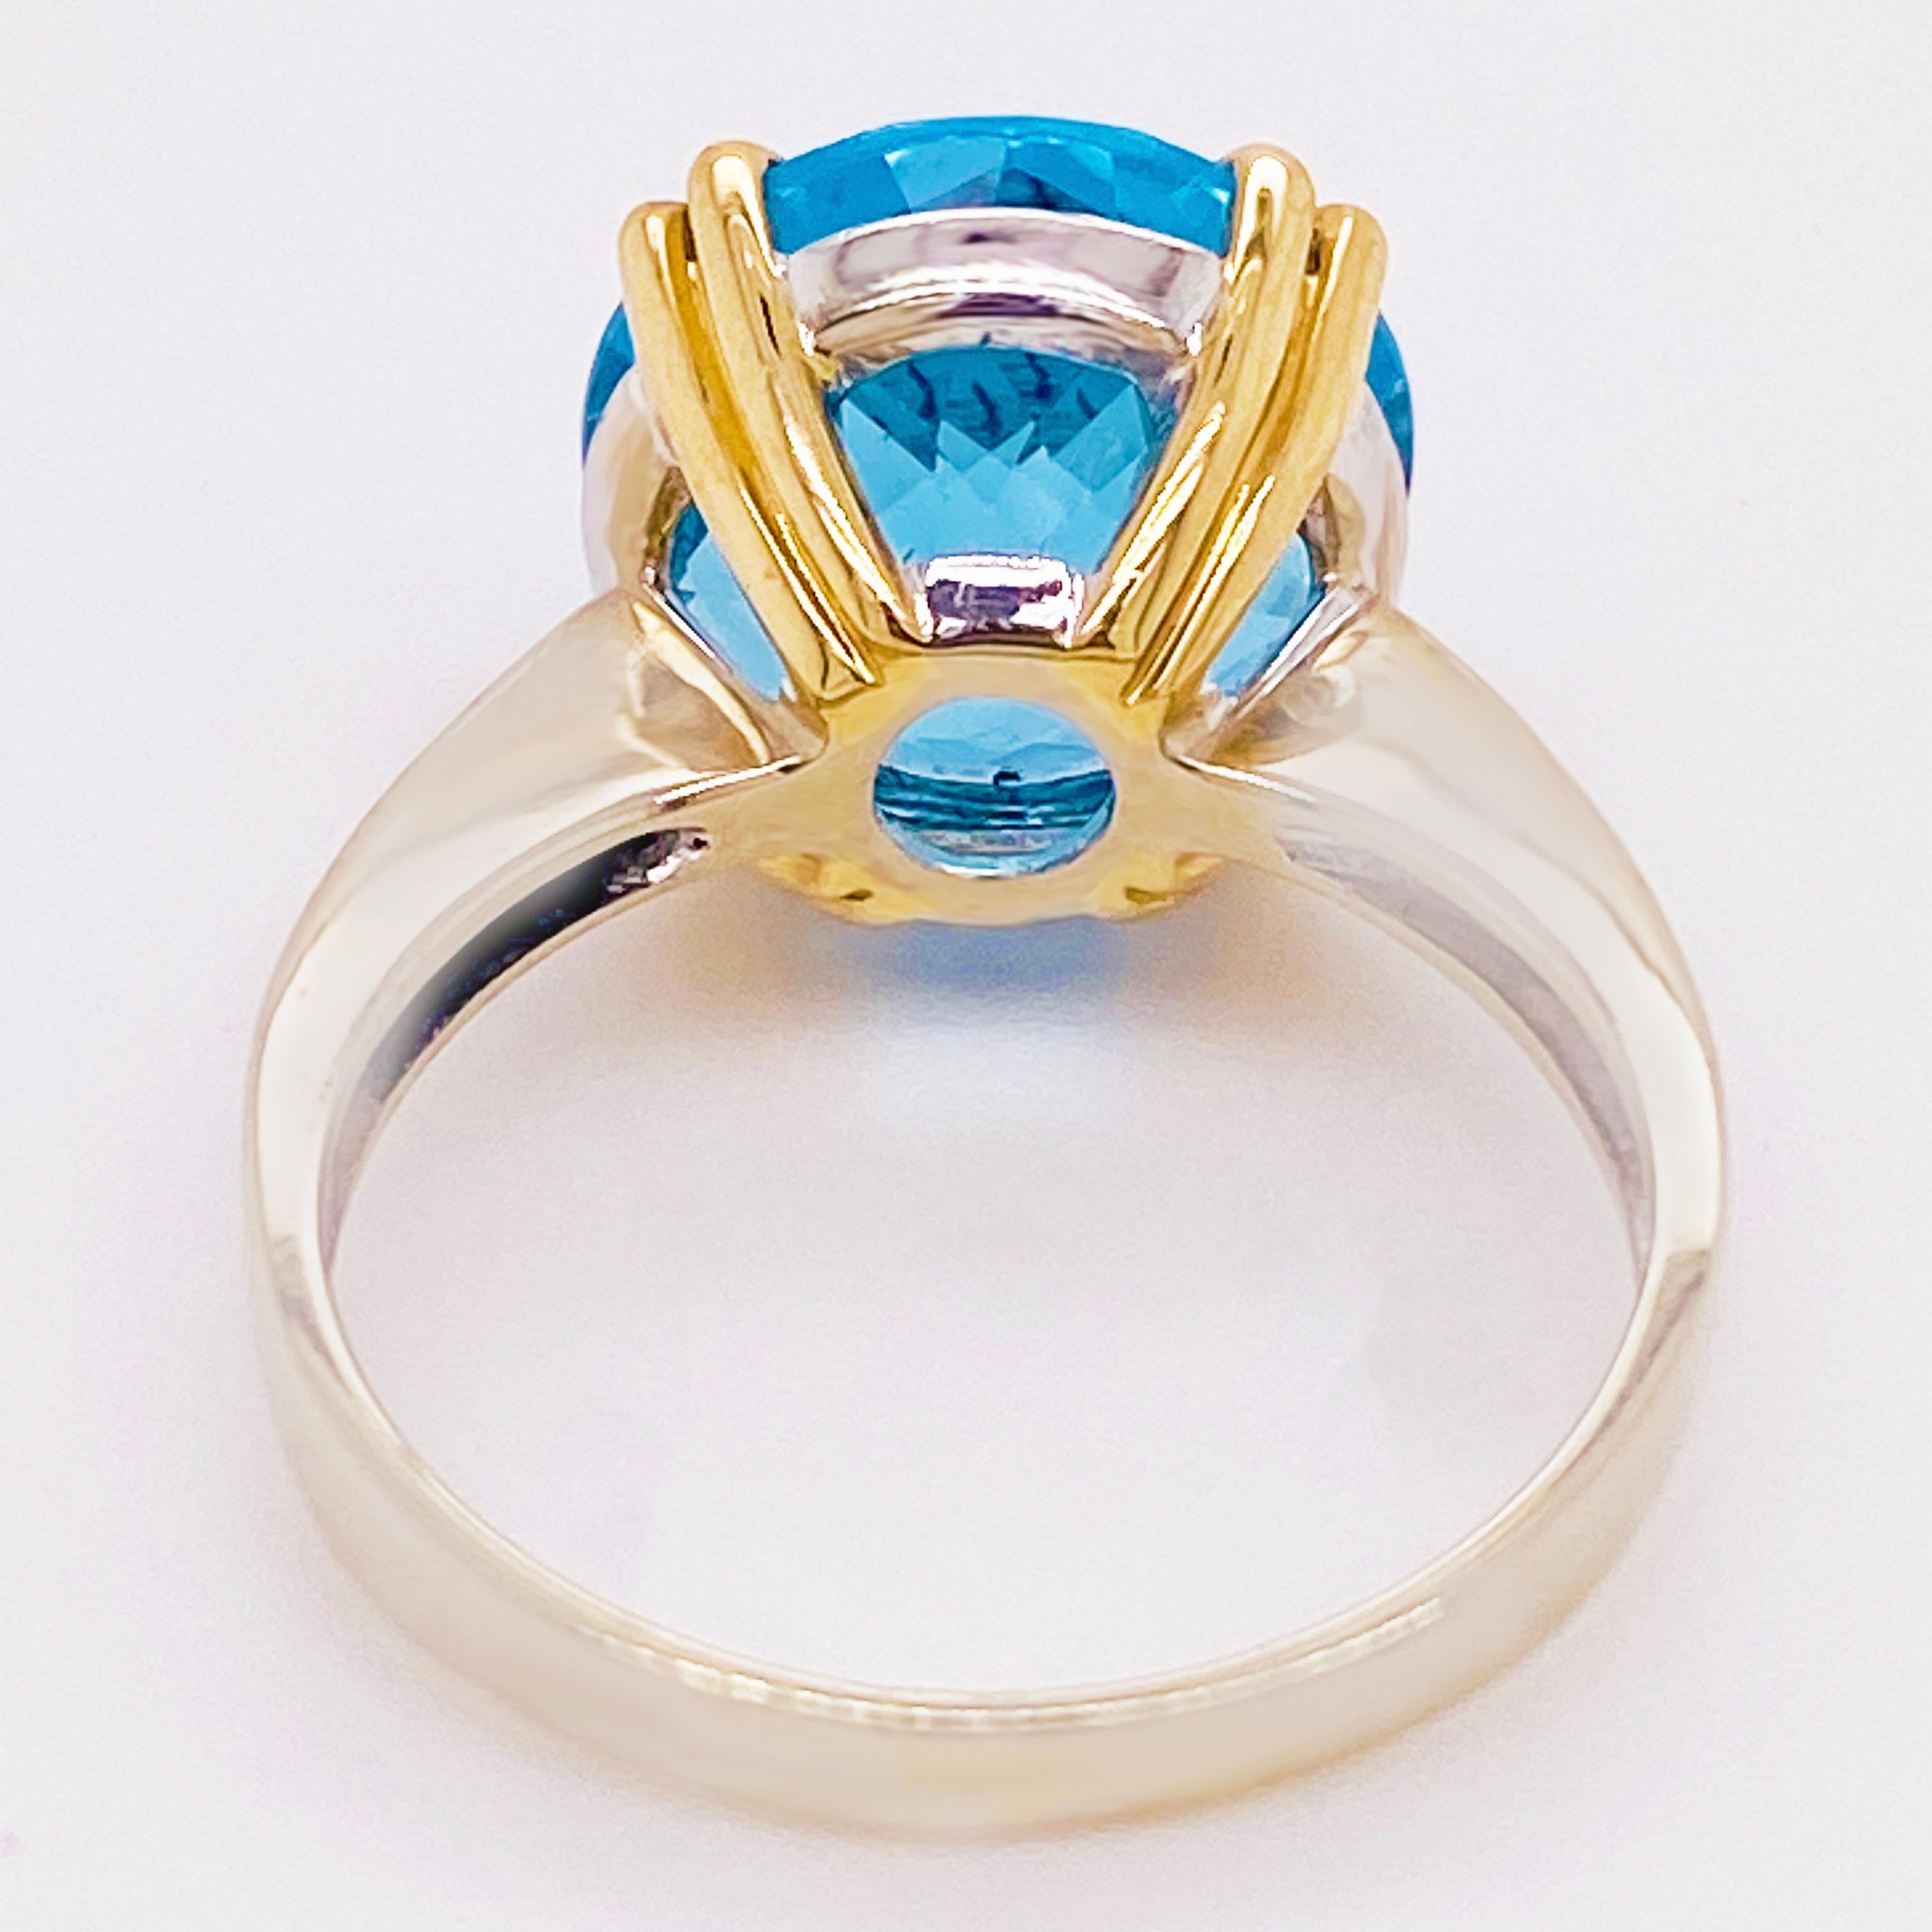 Round Cut Topaz Solitaire Ring, Blue Topaz Mixed Metals 6.16 carats Ring Two Tone sz 6.25